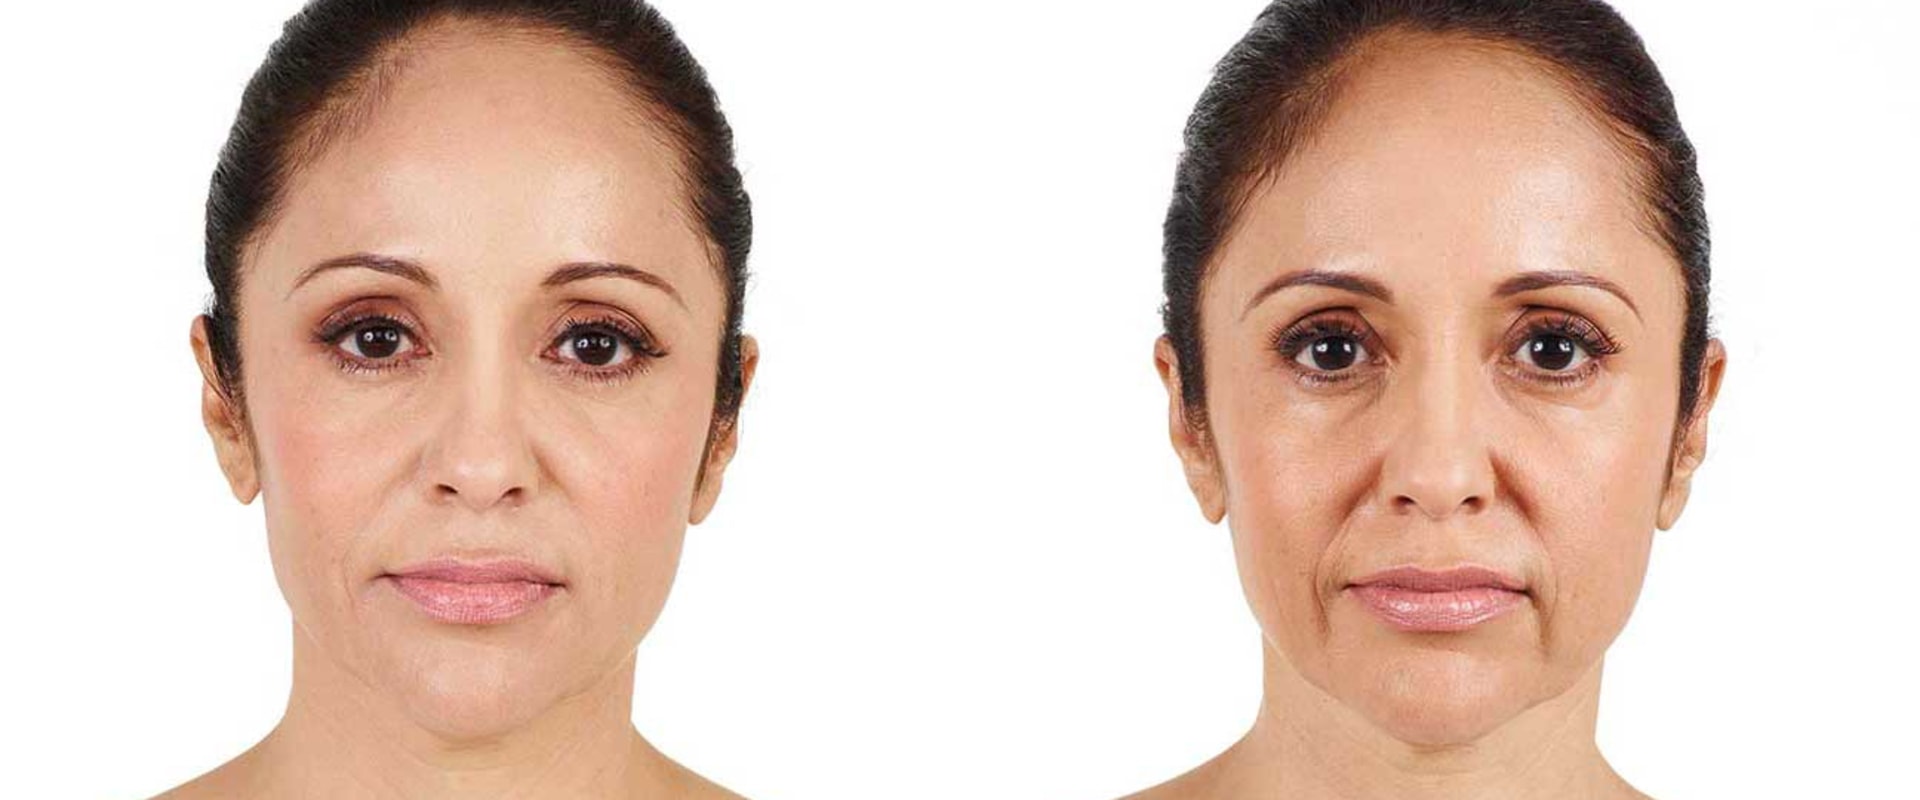 Which Filler is Better Than Juvederm: Restylane or Juvederm?